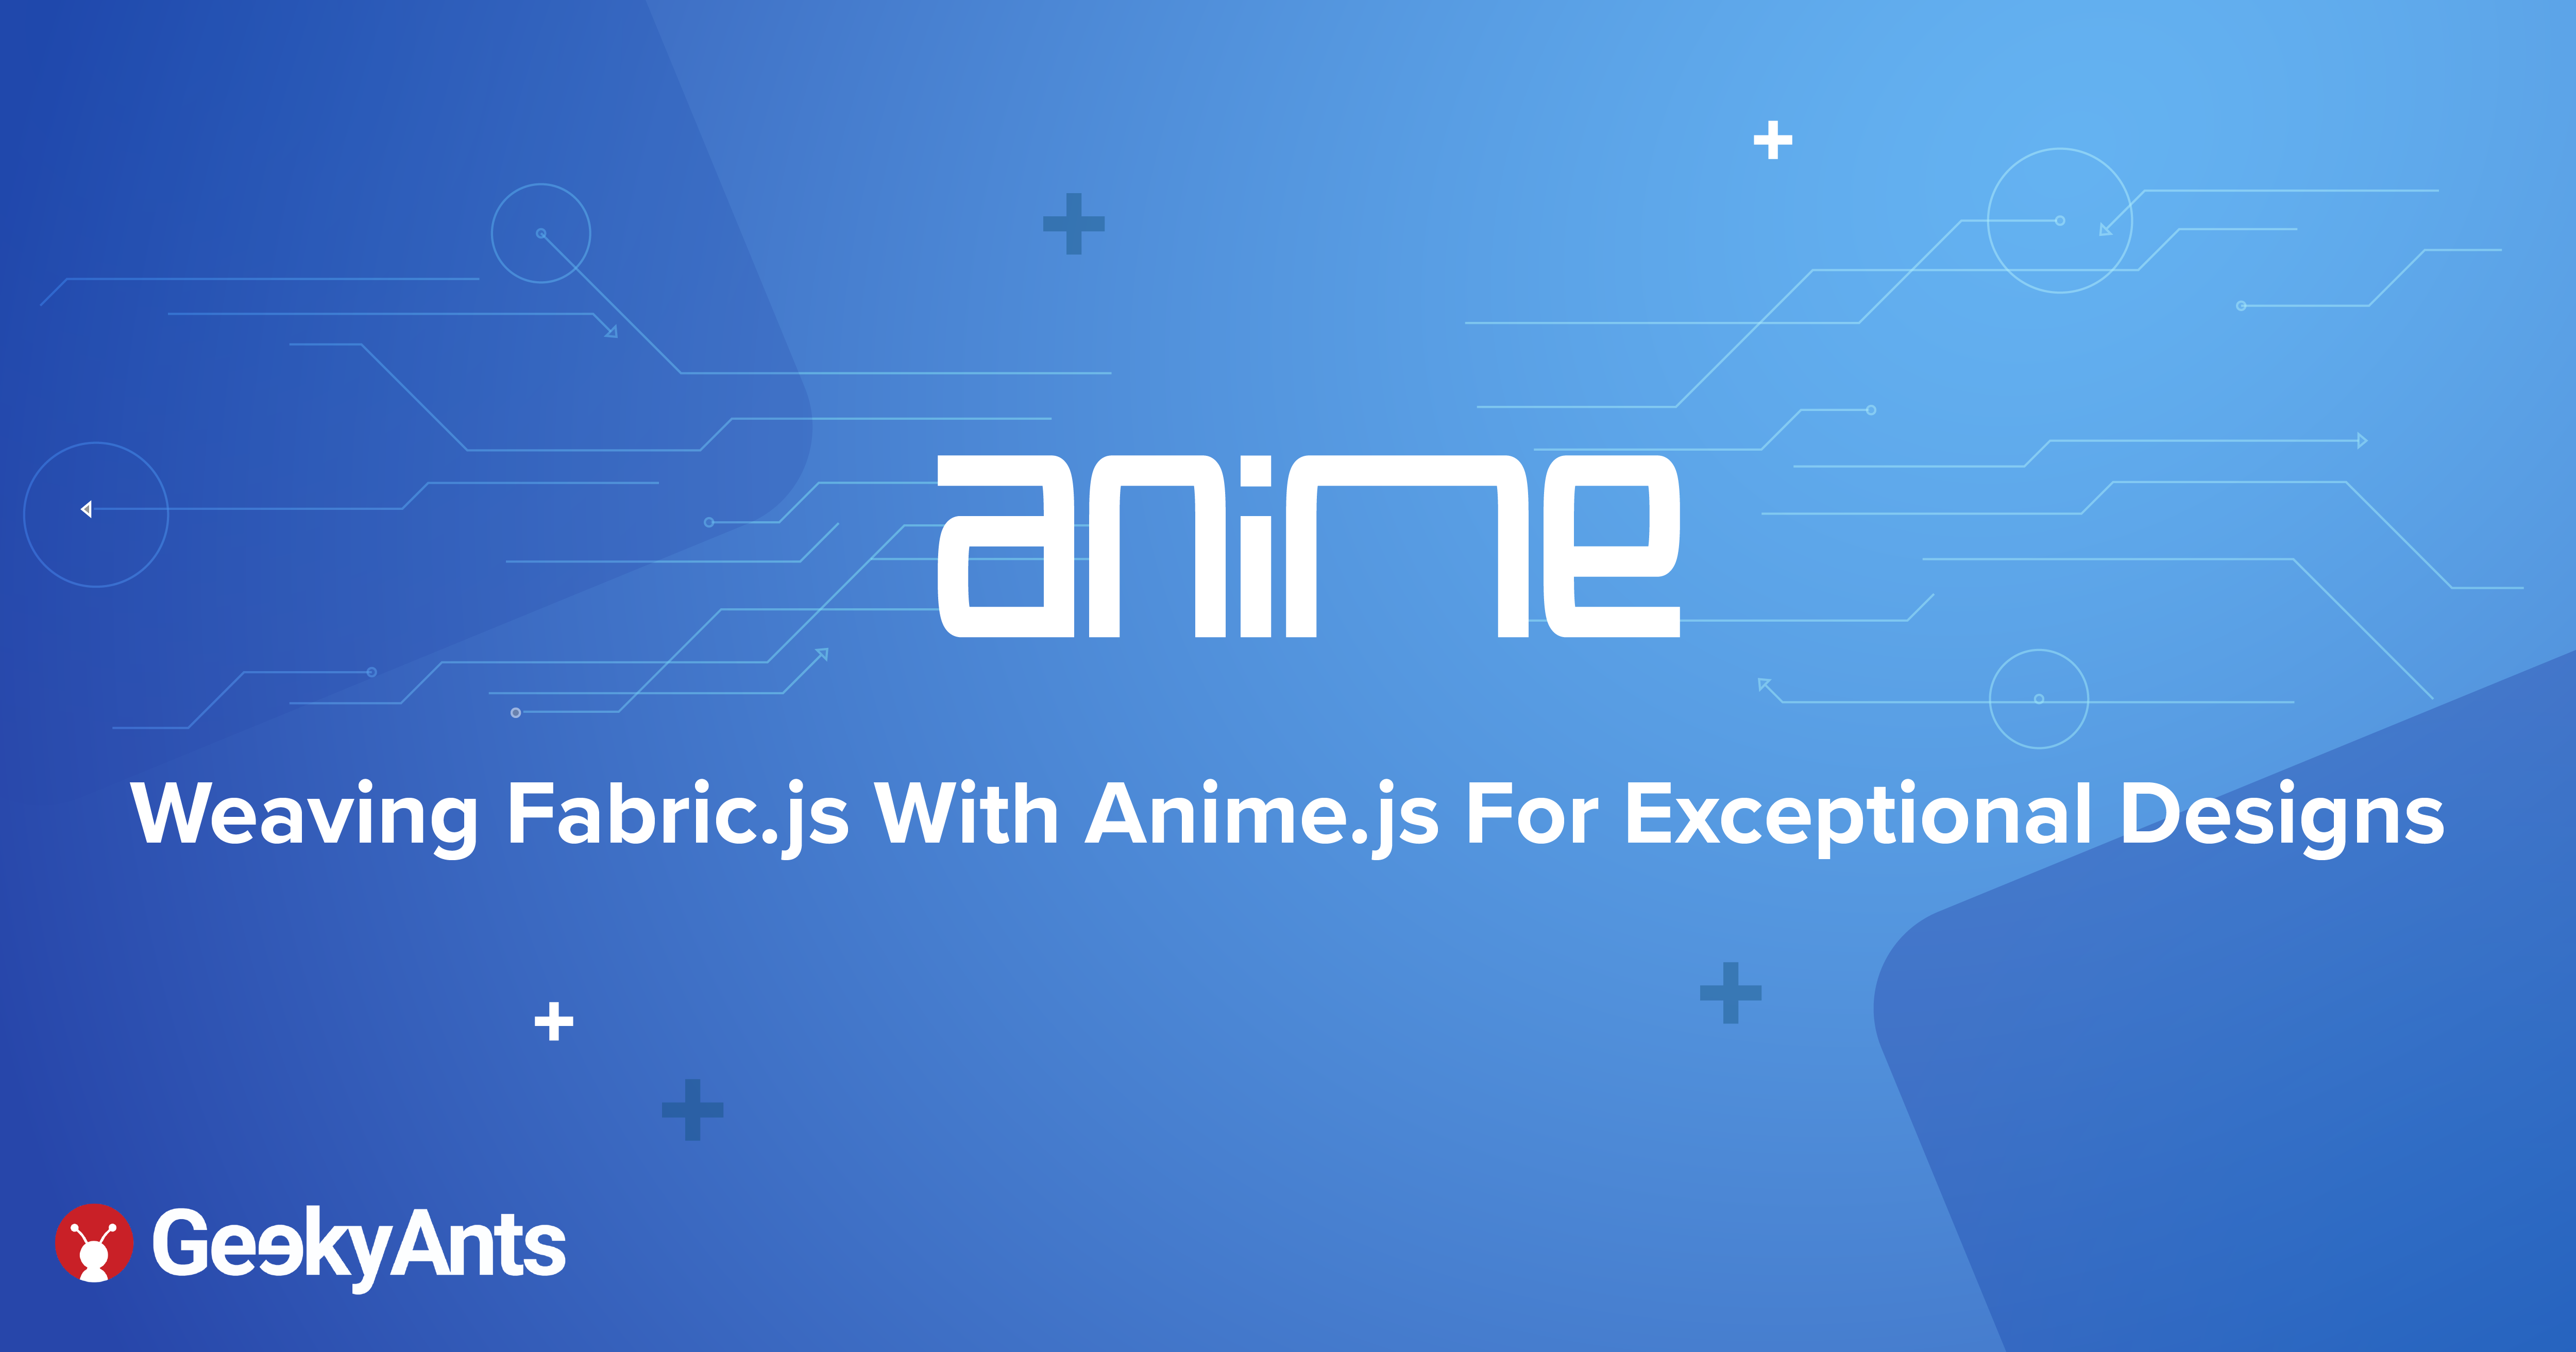 MicroInteractions using Animejs